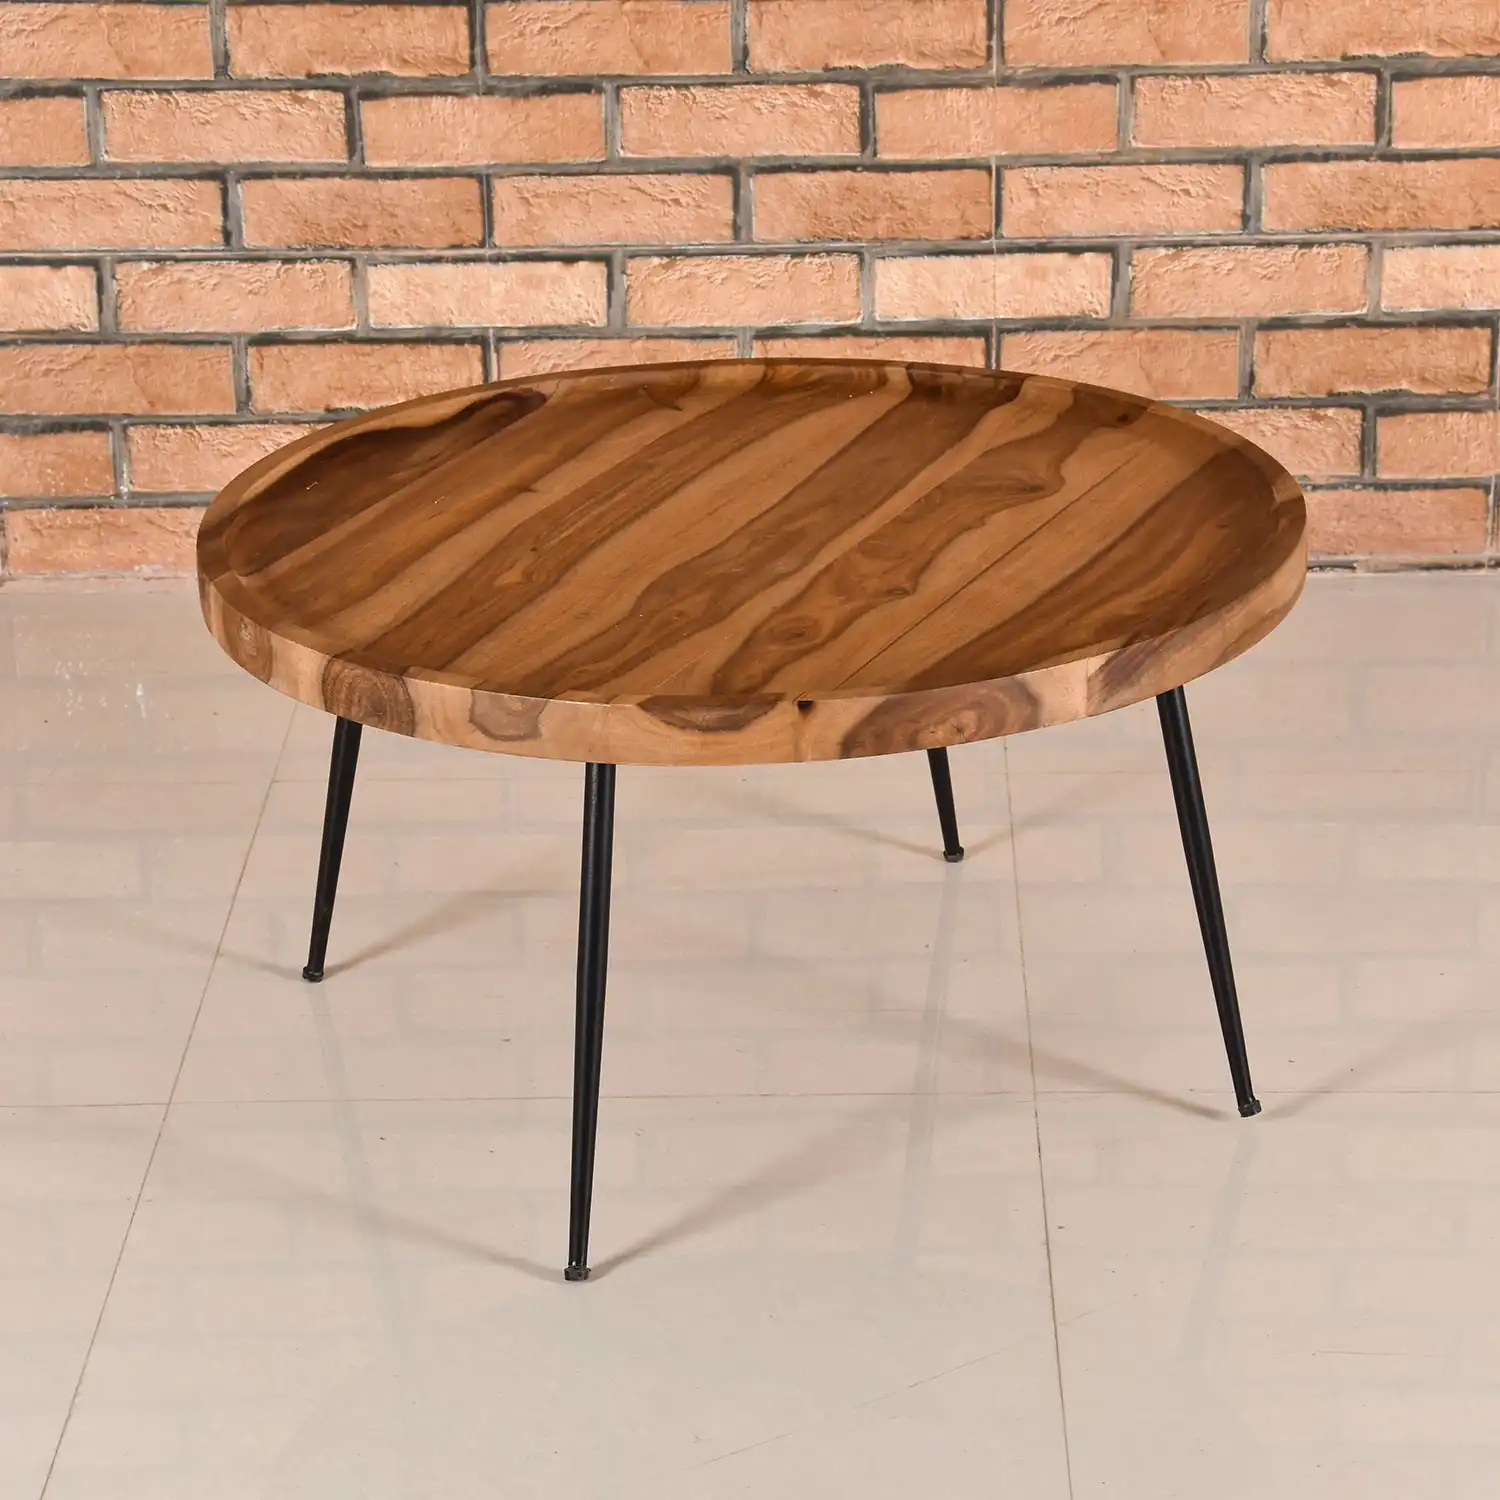 Solid Wood Round Tray Coffee Table
(KD) - popular handicrafts